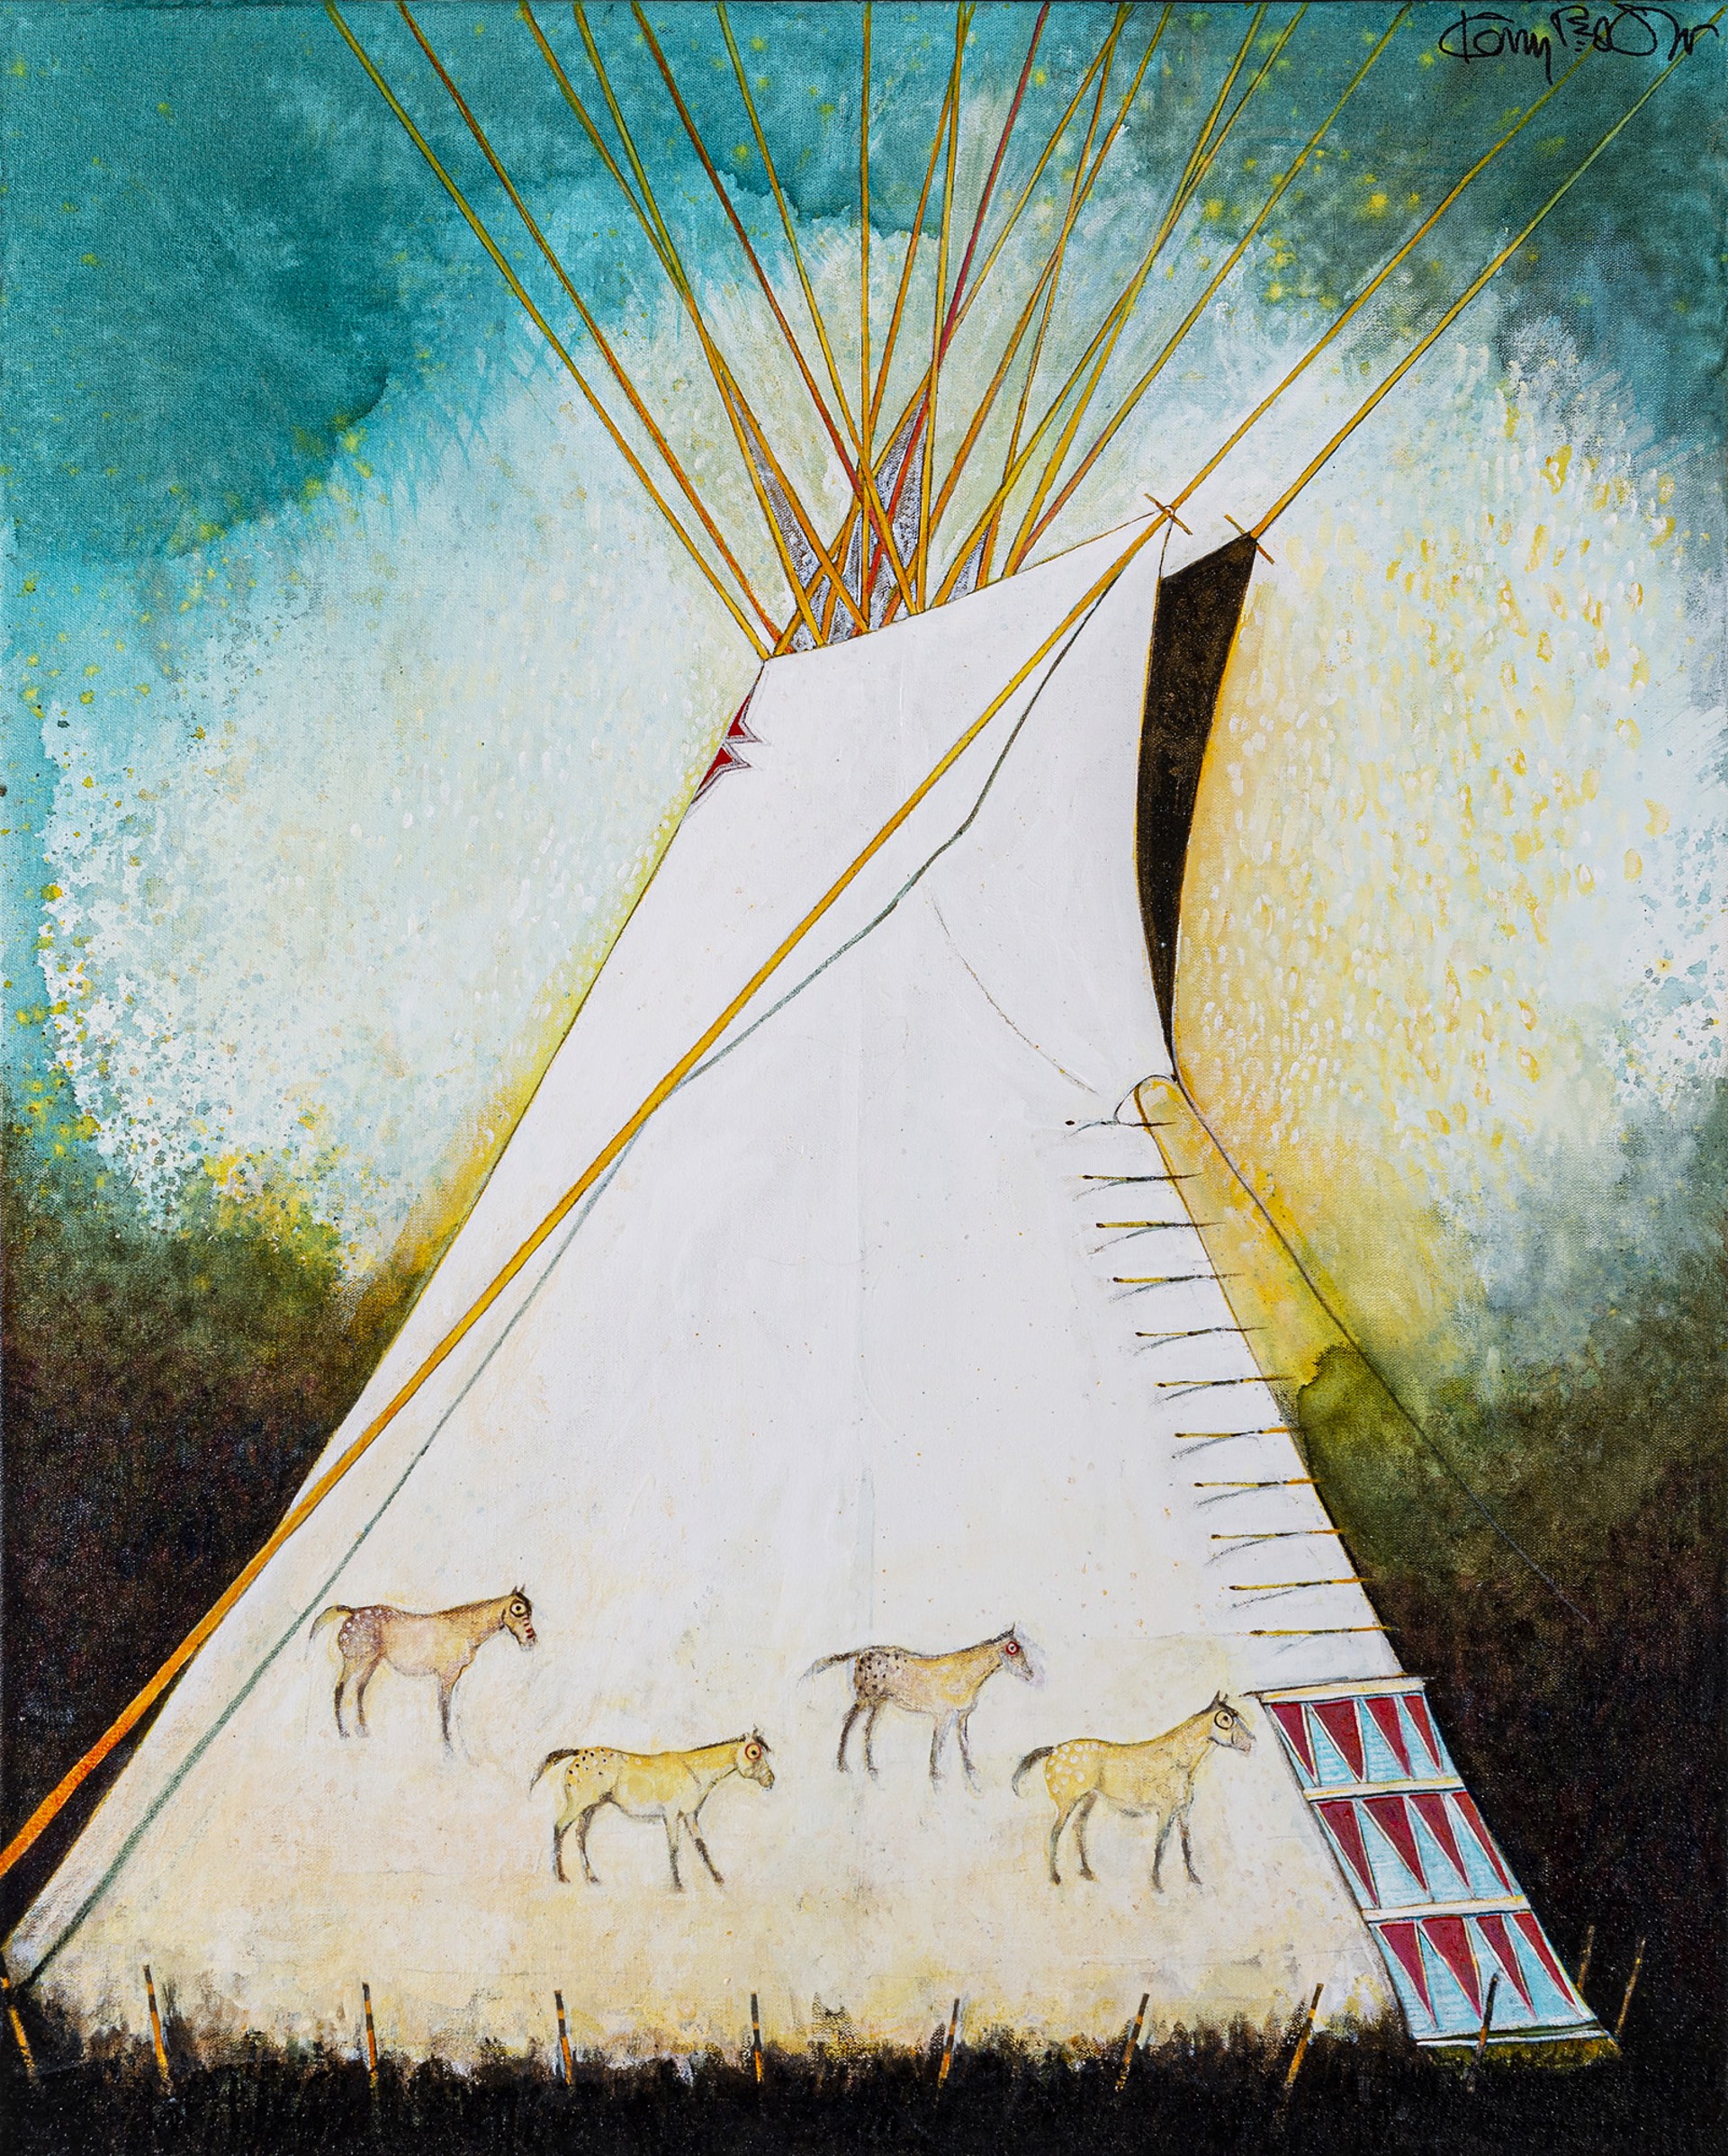 Horse Tipi-Crow Indian by Kevin Red Star